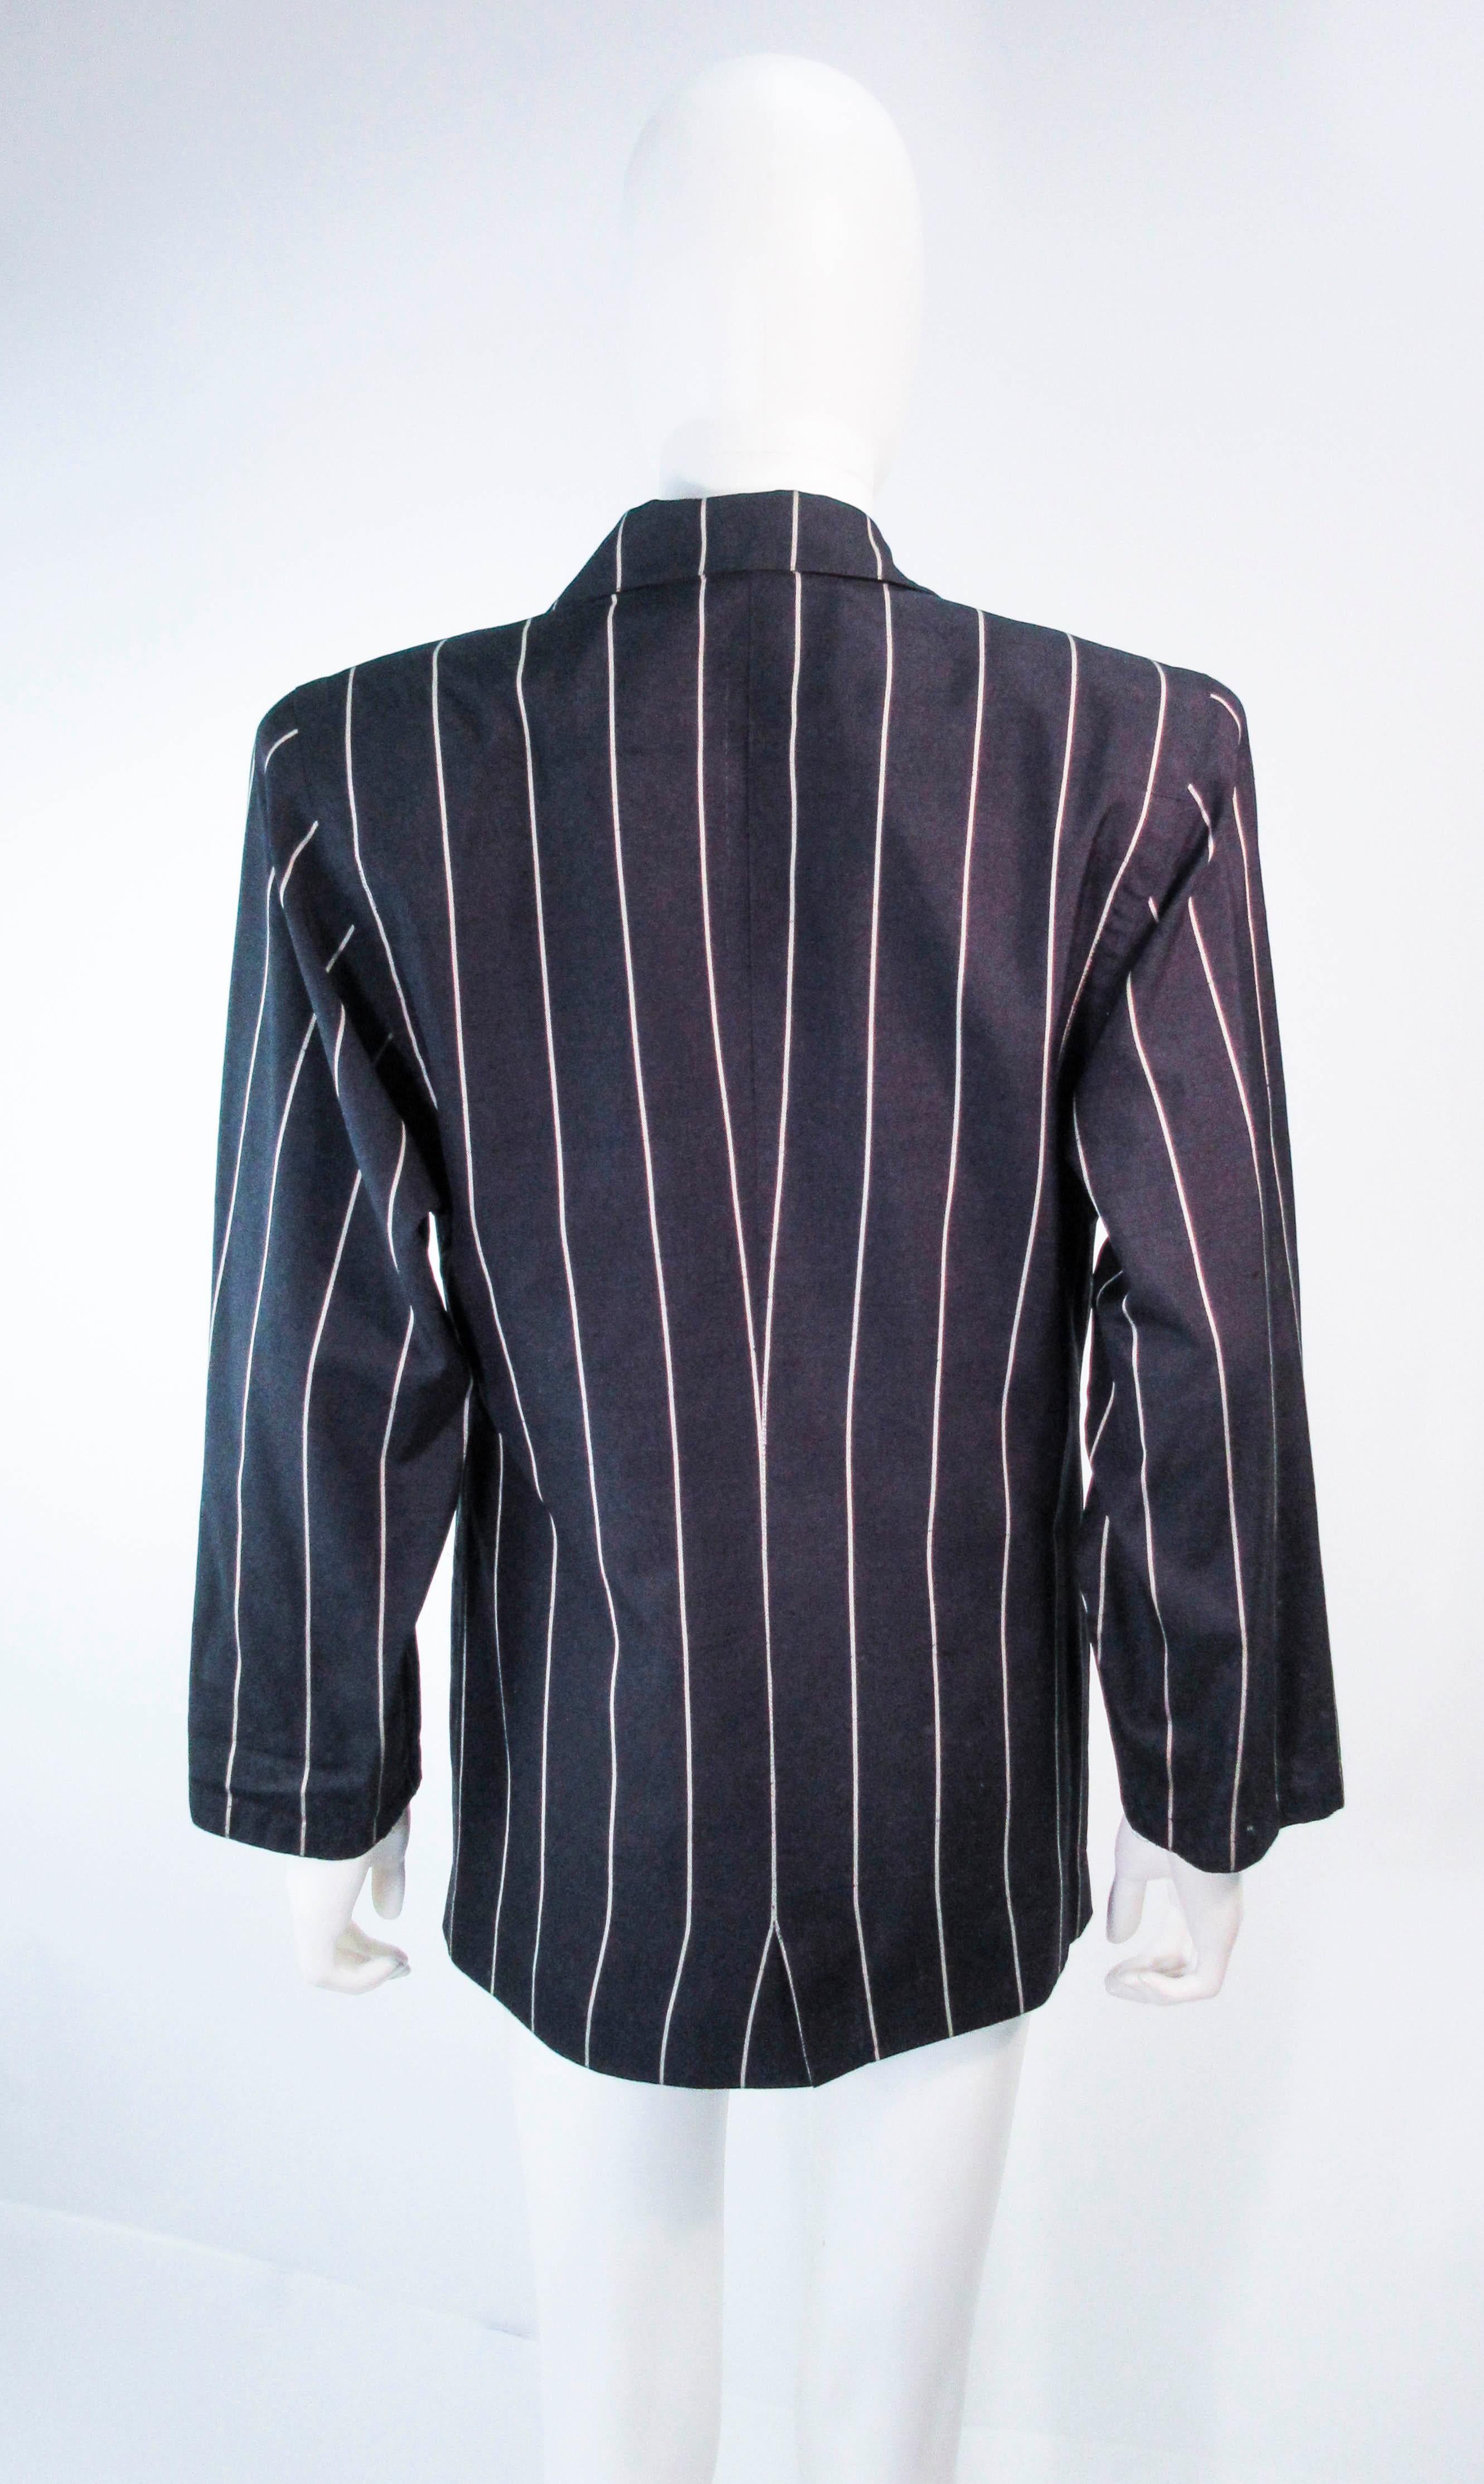 GIANNI VERSACE Black & Cream Striped Jacket Size 6 For Sale 10